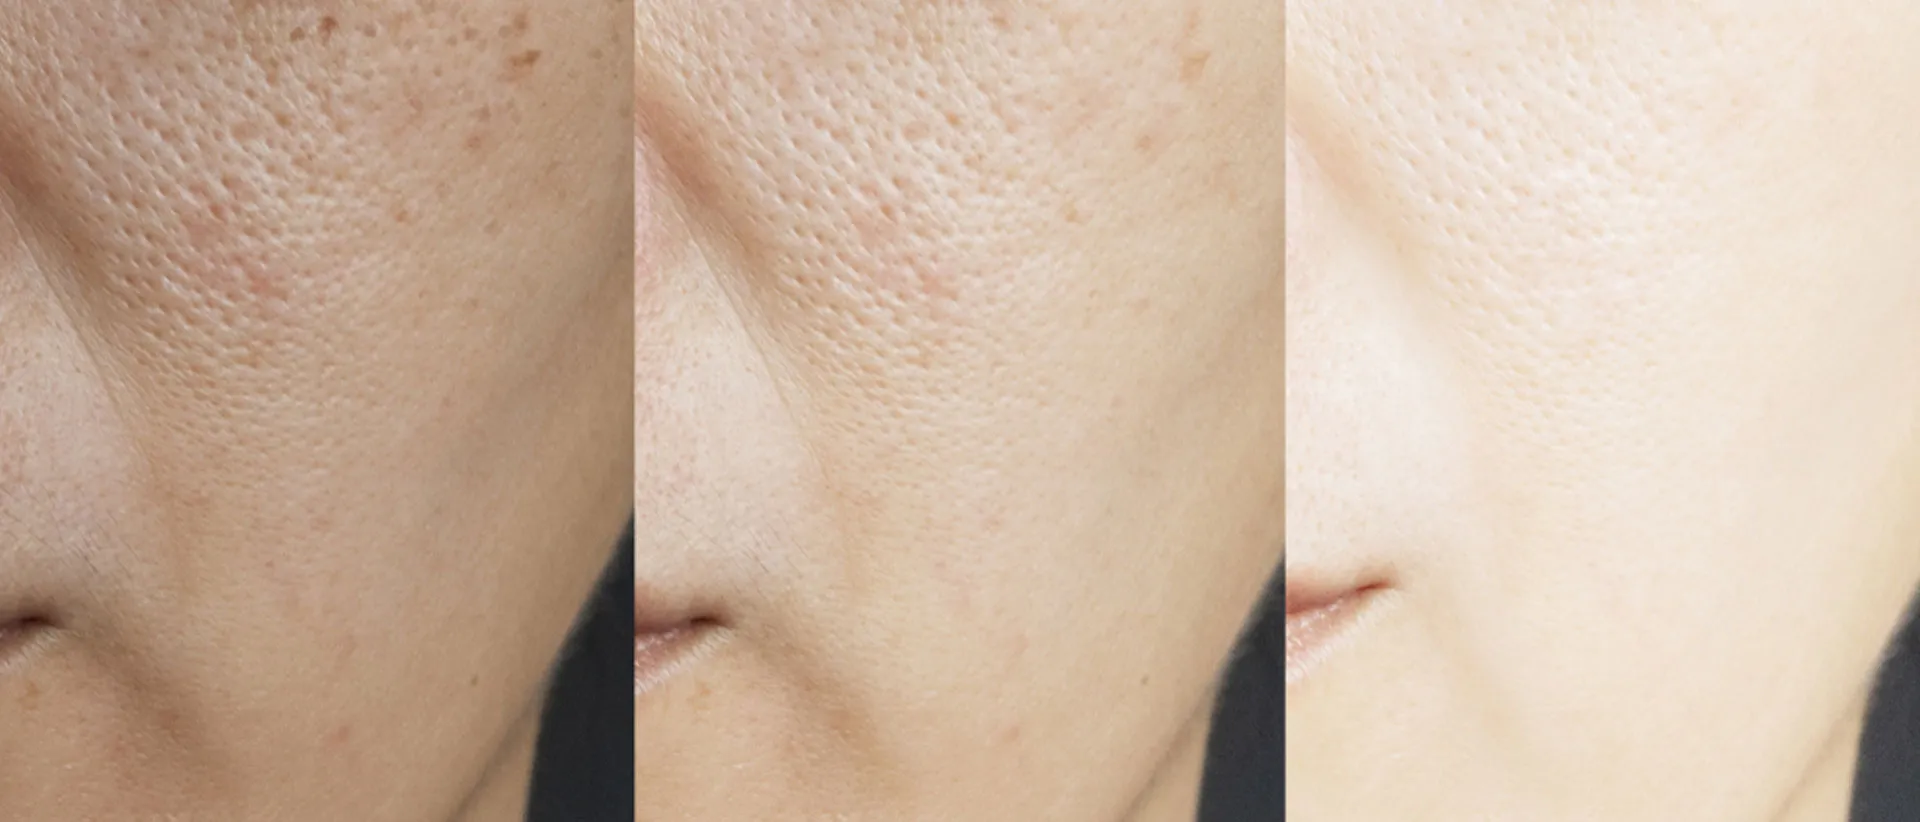 Radiant and luminous skin after whitening and brightening treatment.
